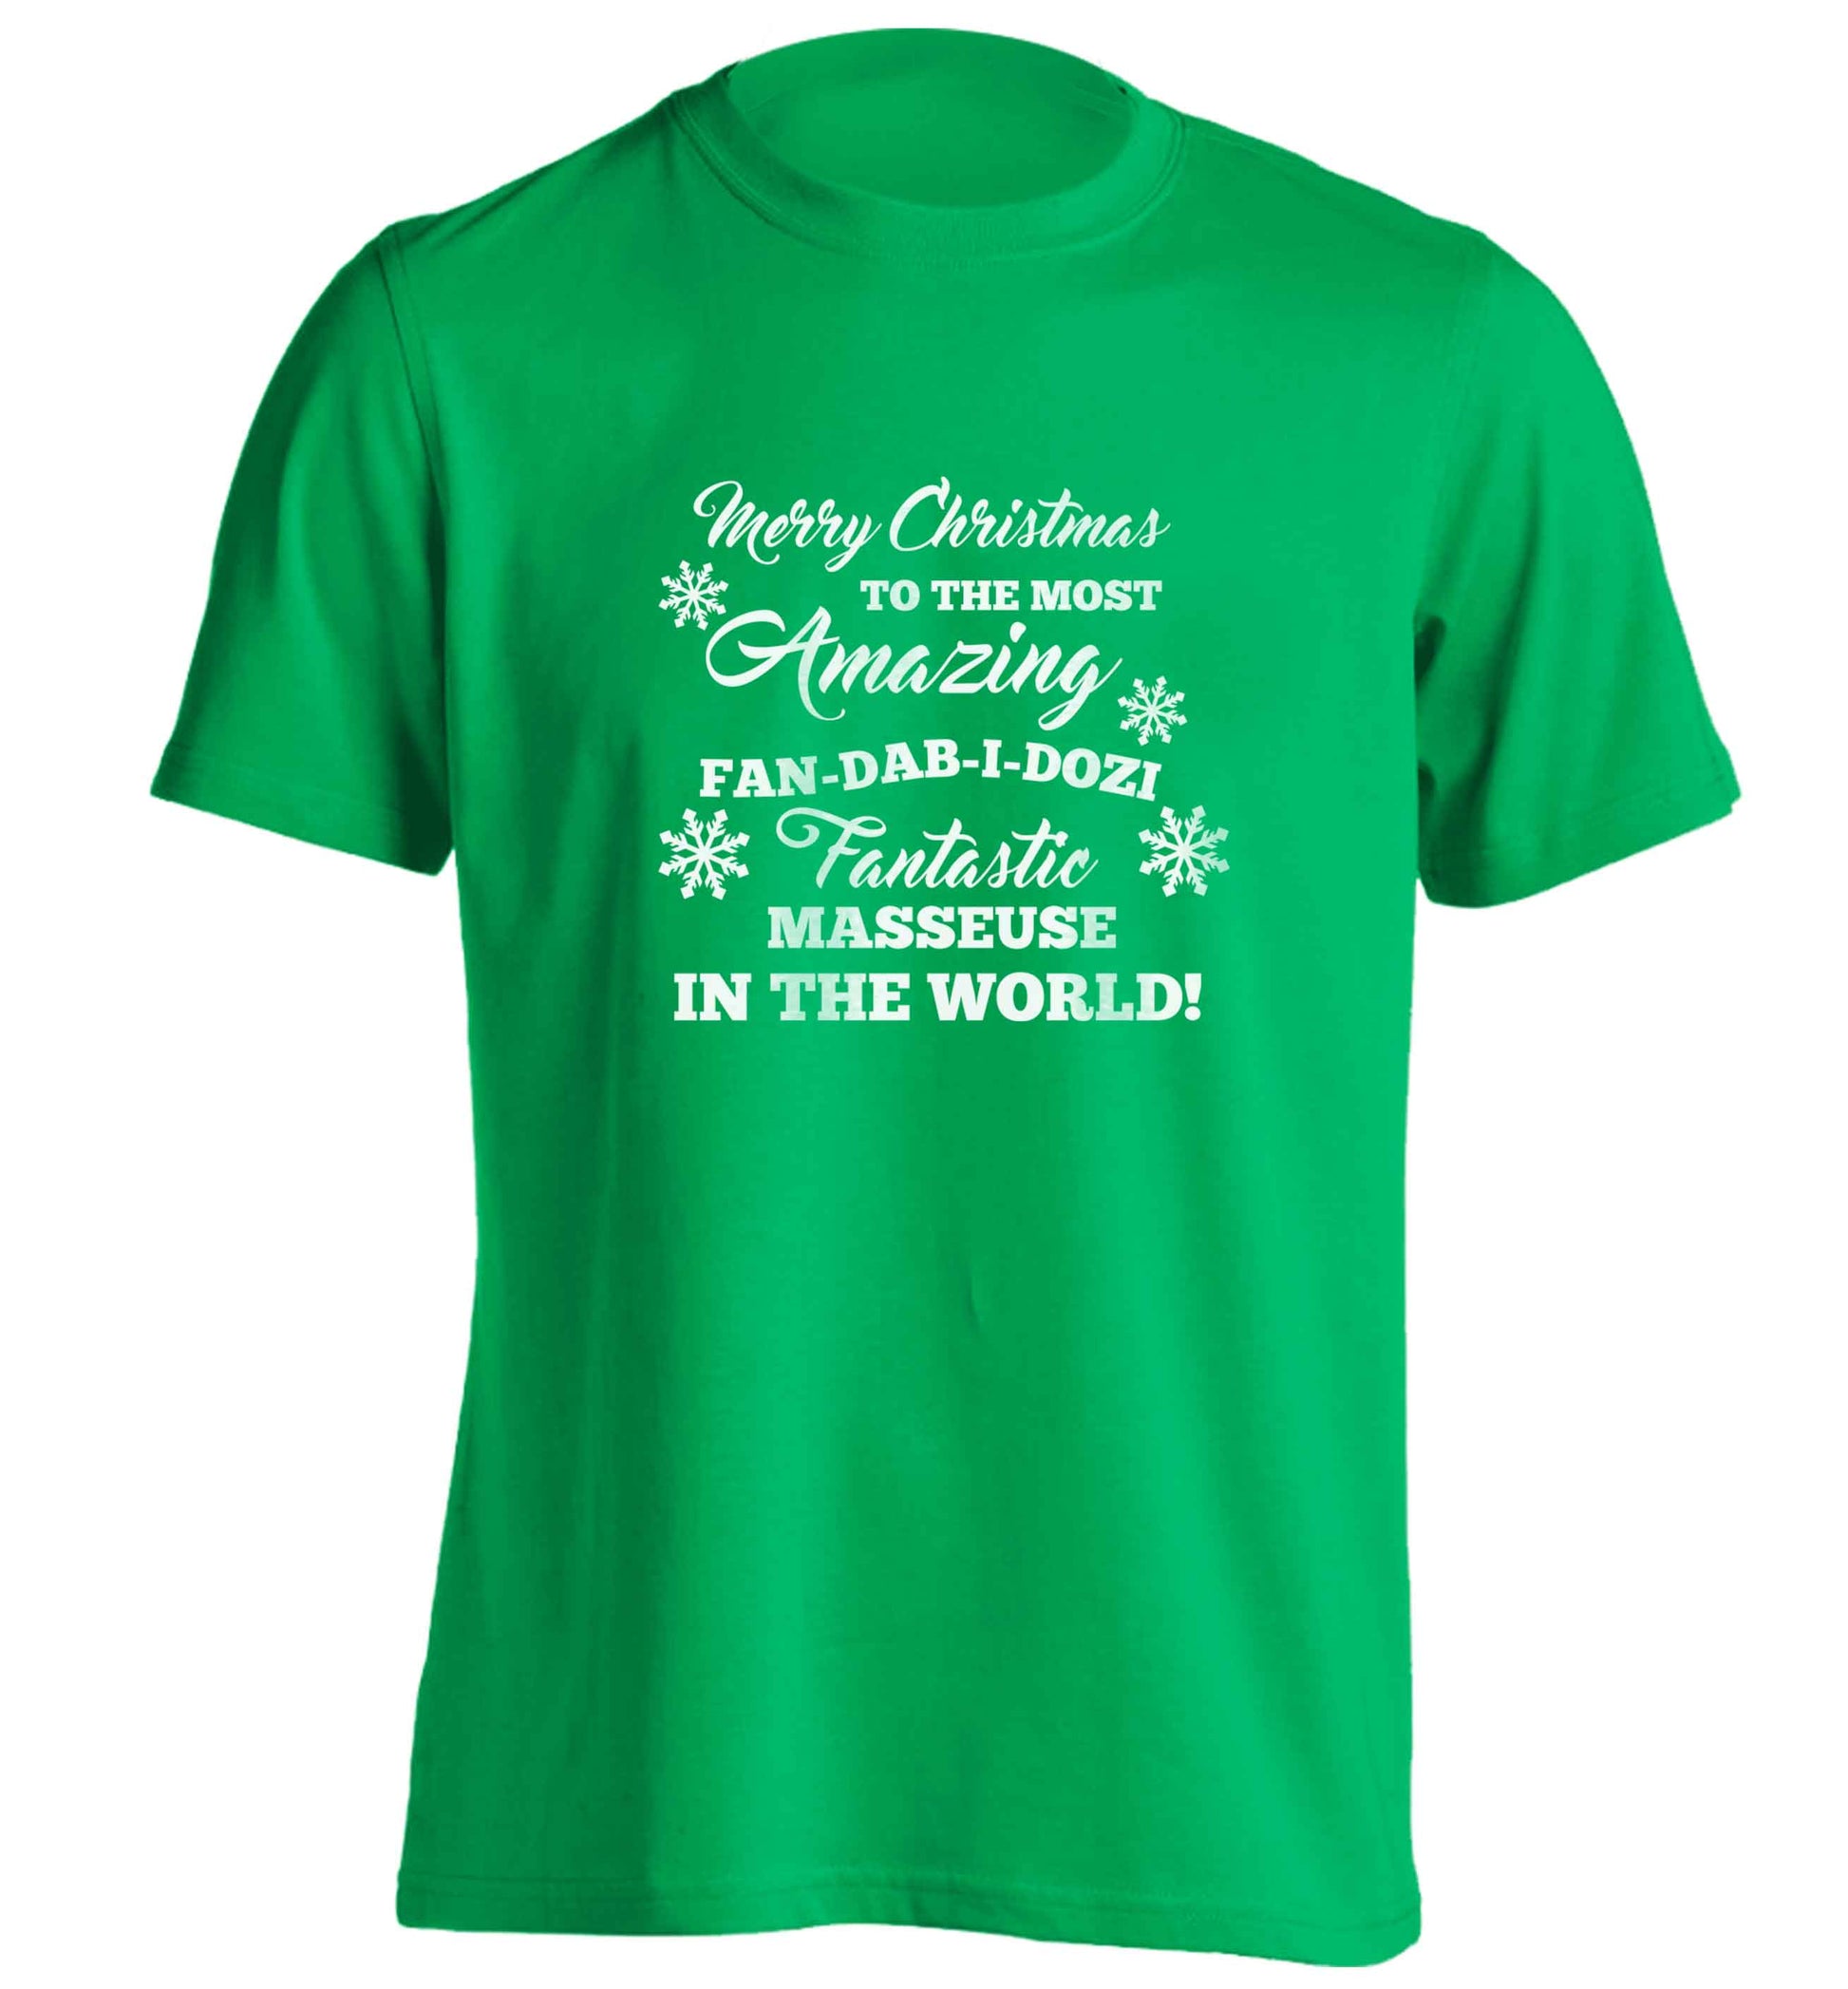 Merry Christmas to the most amazing fan-dab-i-dozi fantasic masseuse in the world adults unisex green Tshirt 2XL